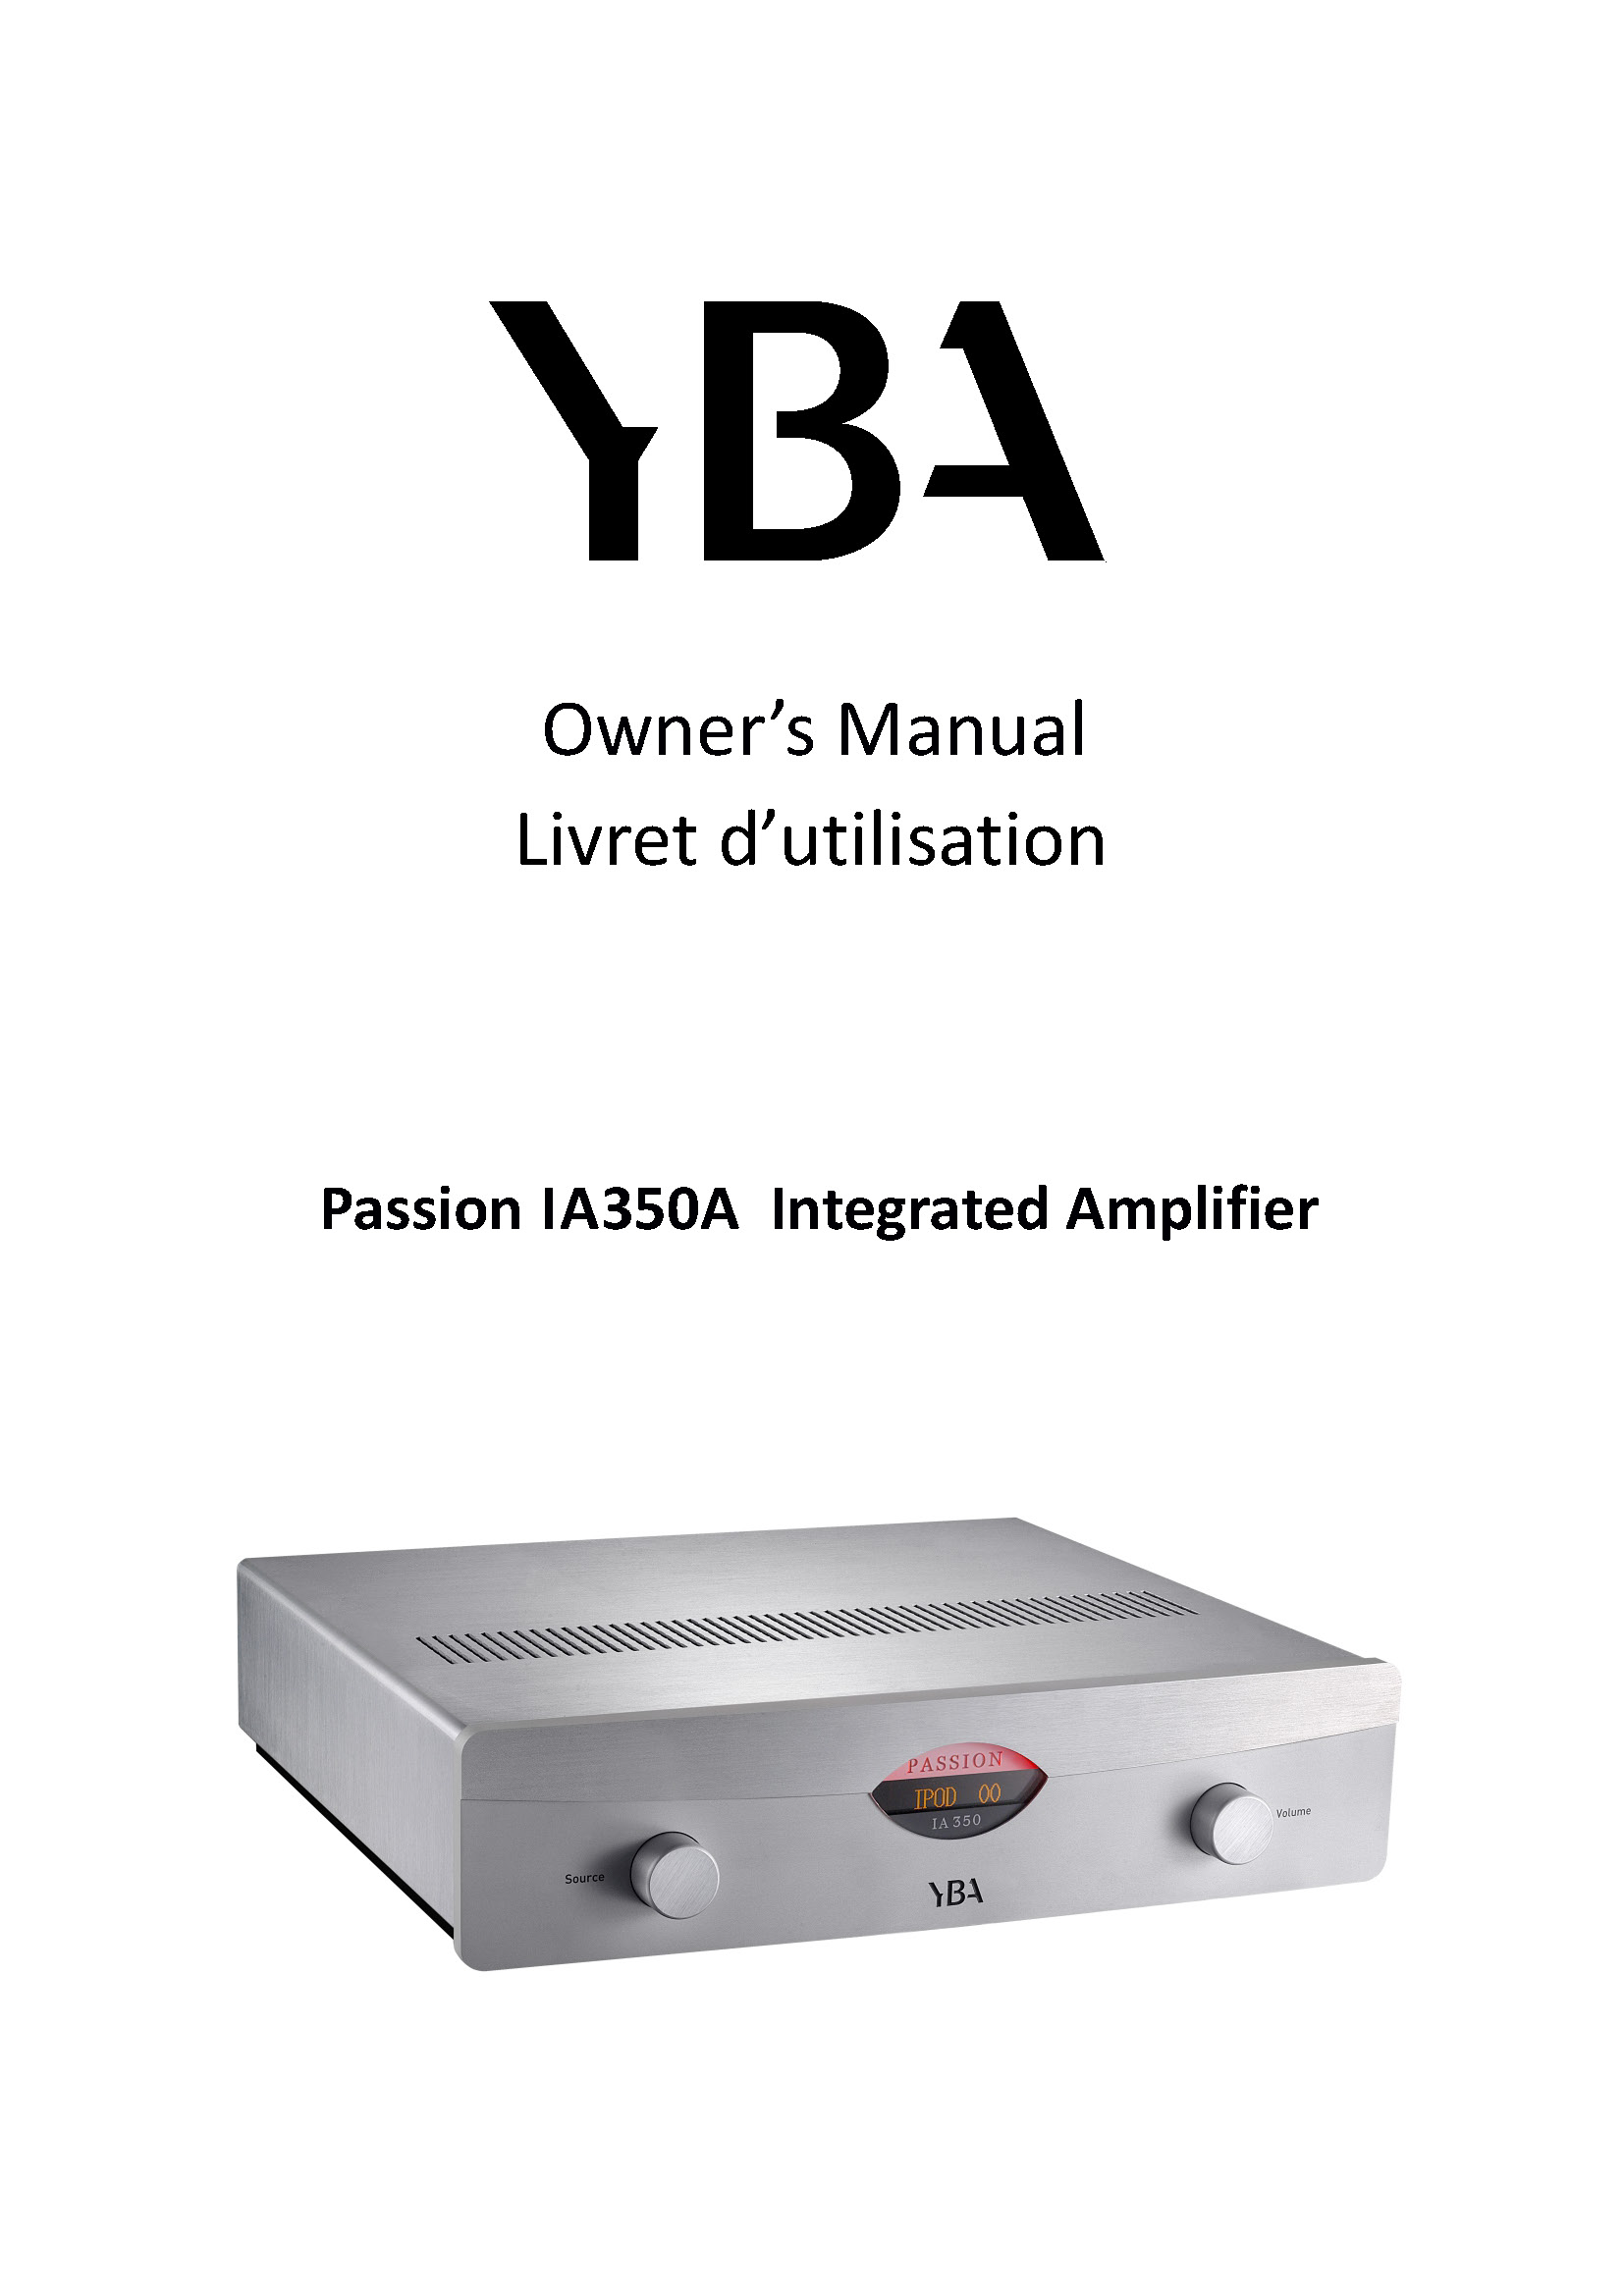 YBA Passion IA350A Owner Manual - Norman Audio